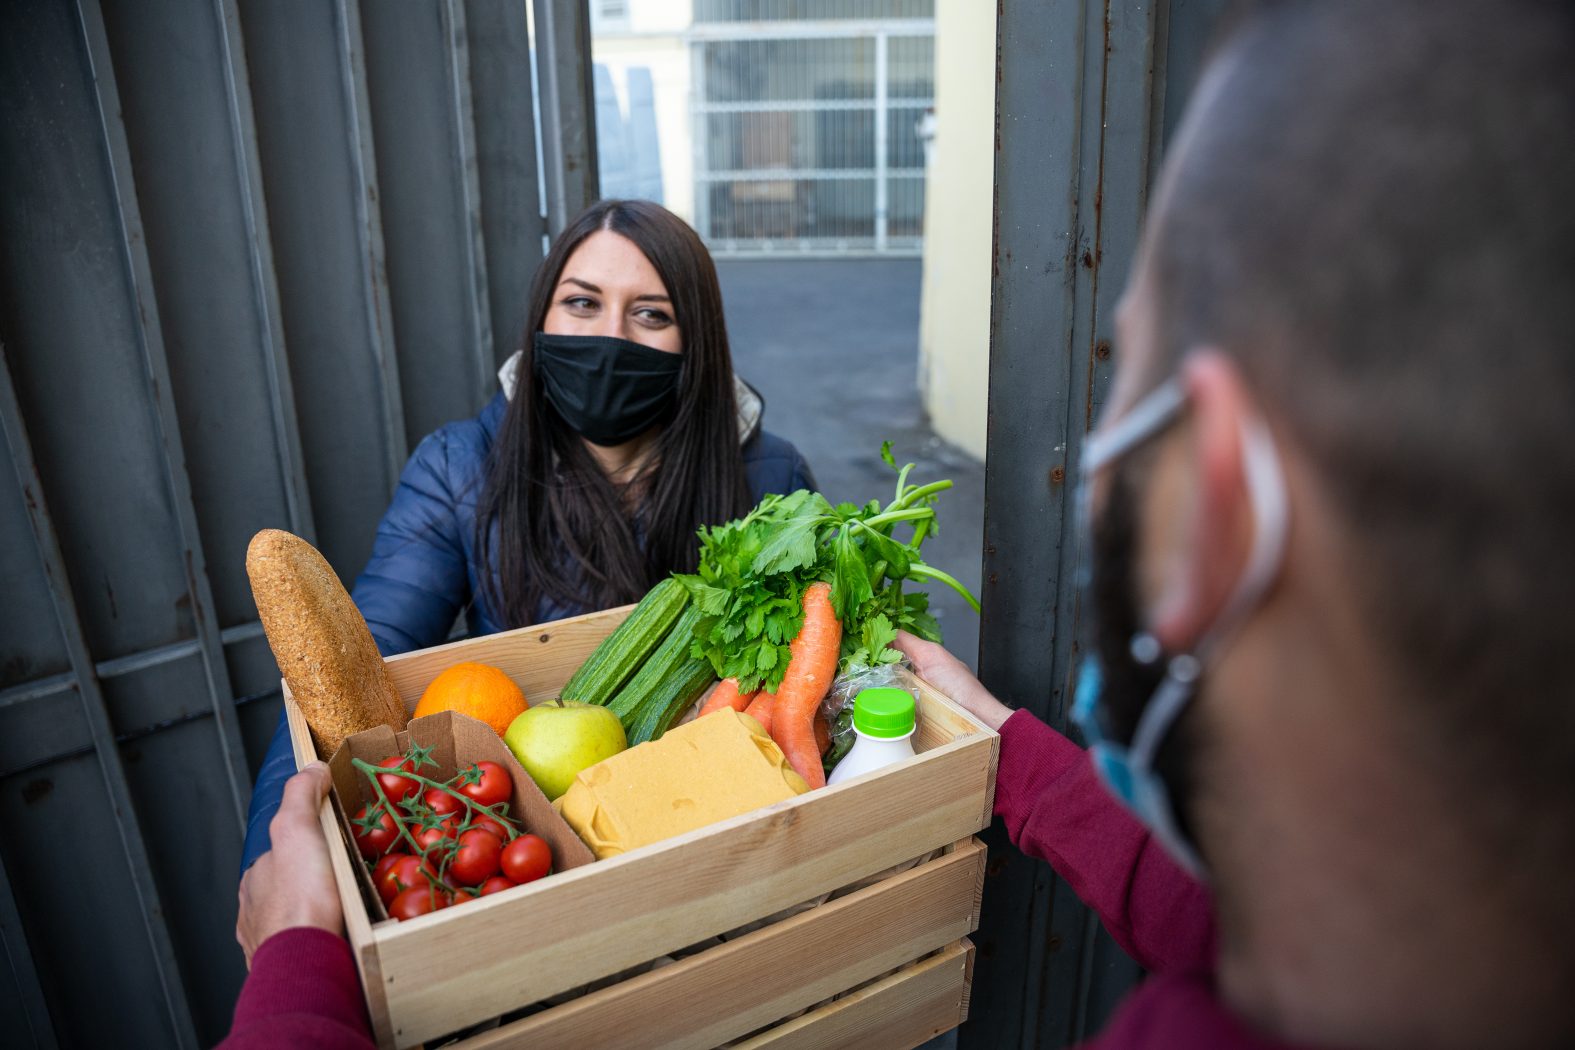 Young man courier delivers online shopping basket with fresh fruit vegetables to woman customer's home during Coronavirus Covid-19 pandemic quarantine wearing protective face mask - Concept delivery